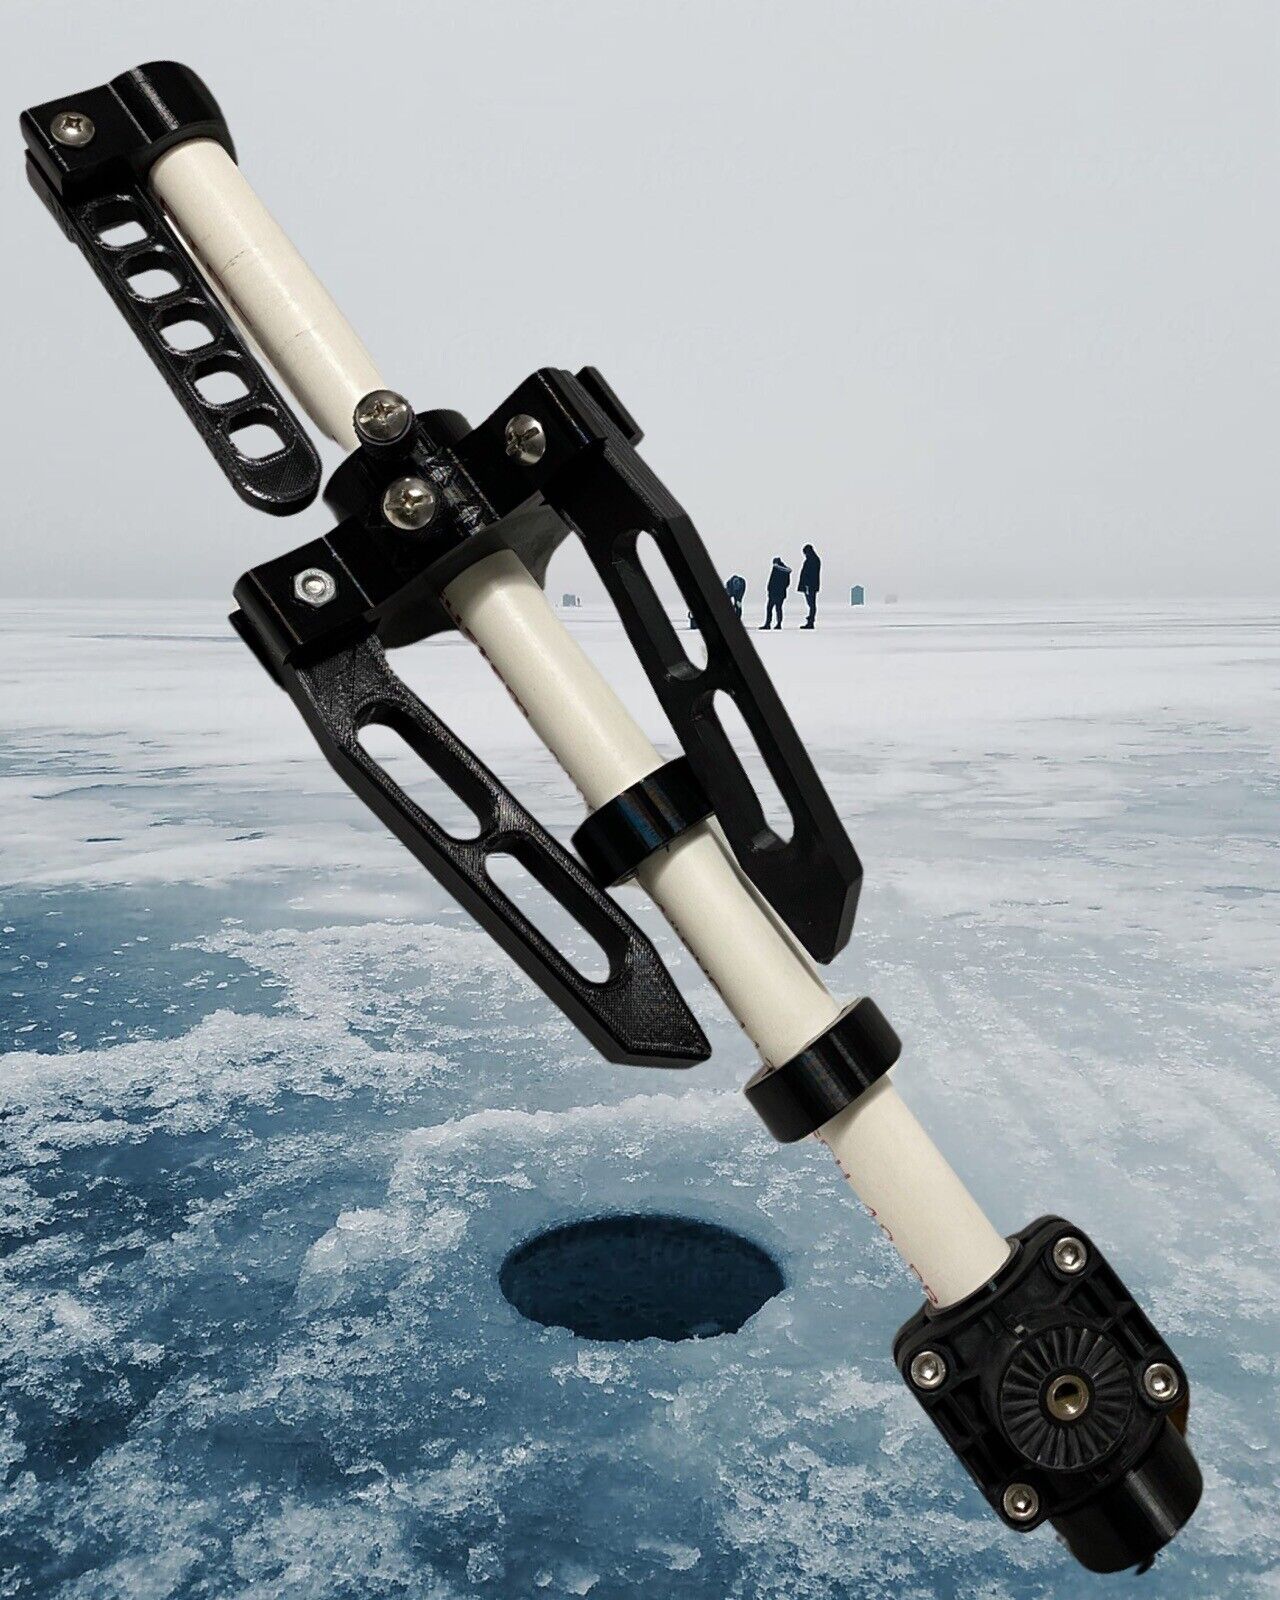 Ice Fishing Rod Holder 2 Pack - For Sleds Or Ice Shanty - Clam, Otter,  Shappell